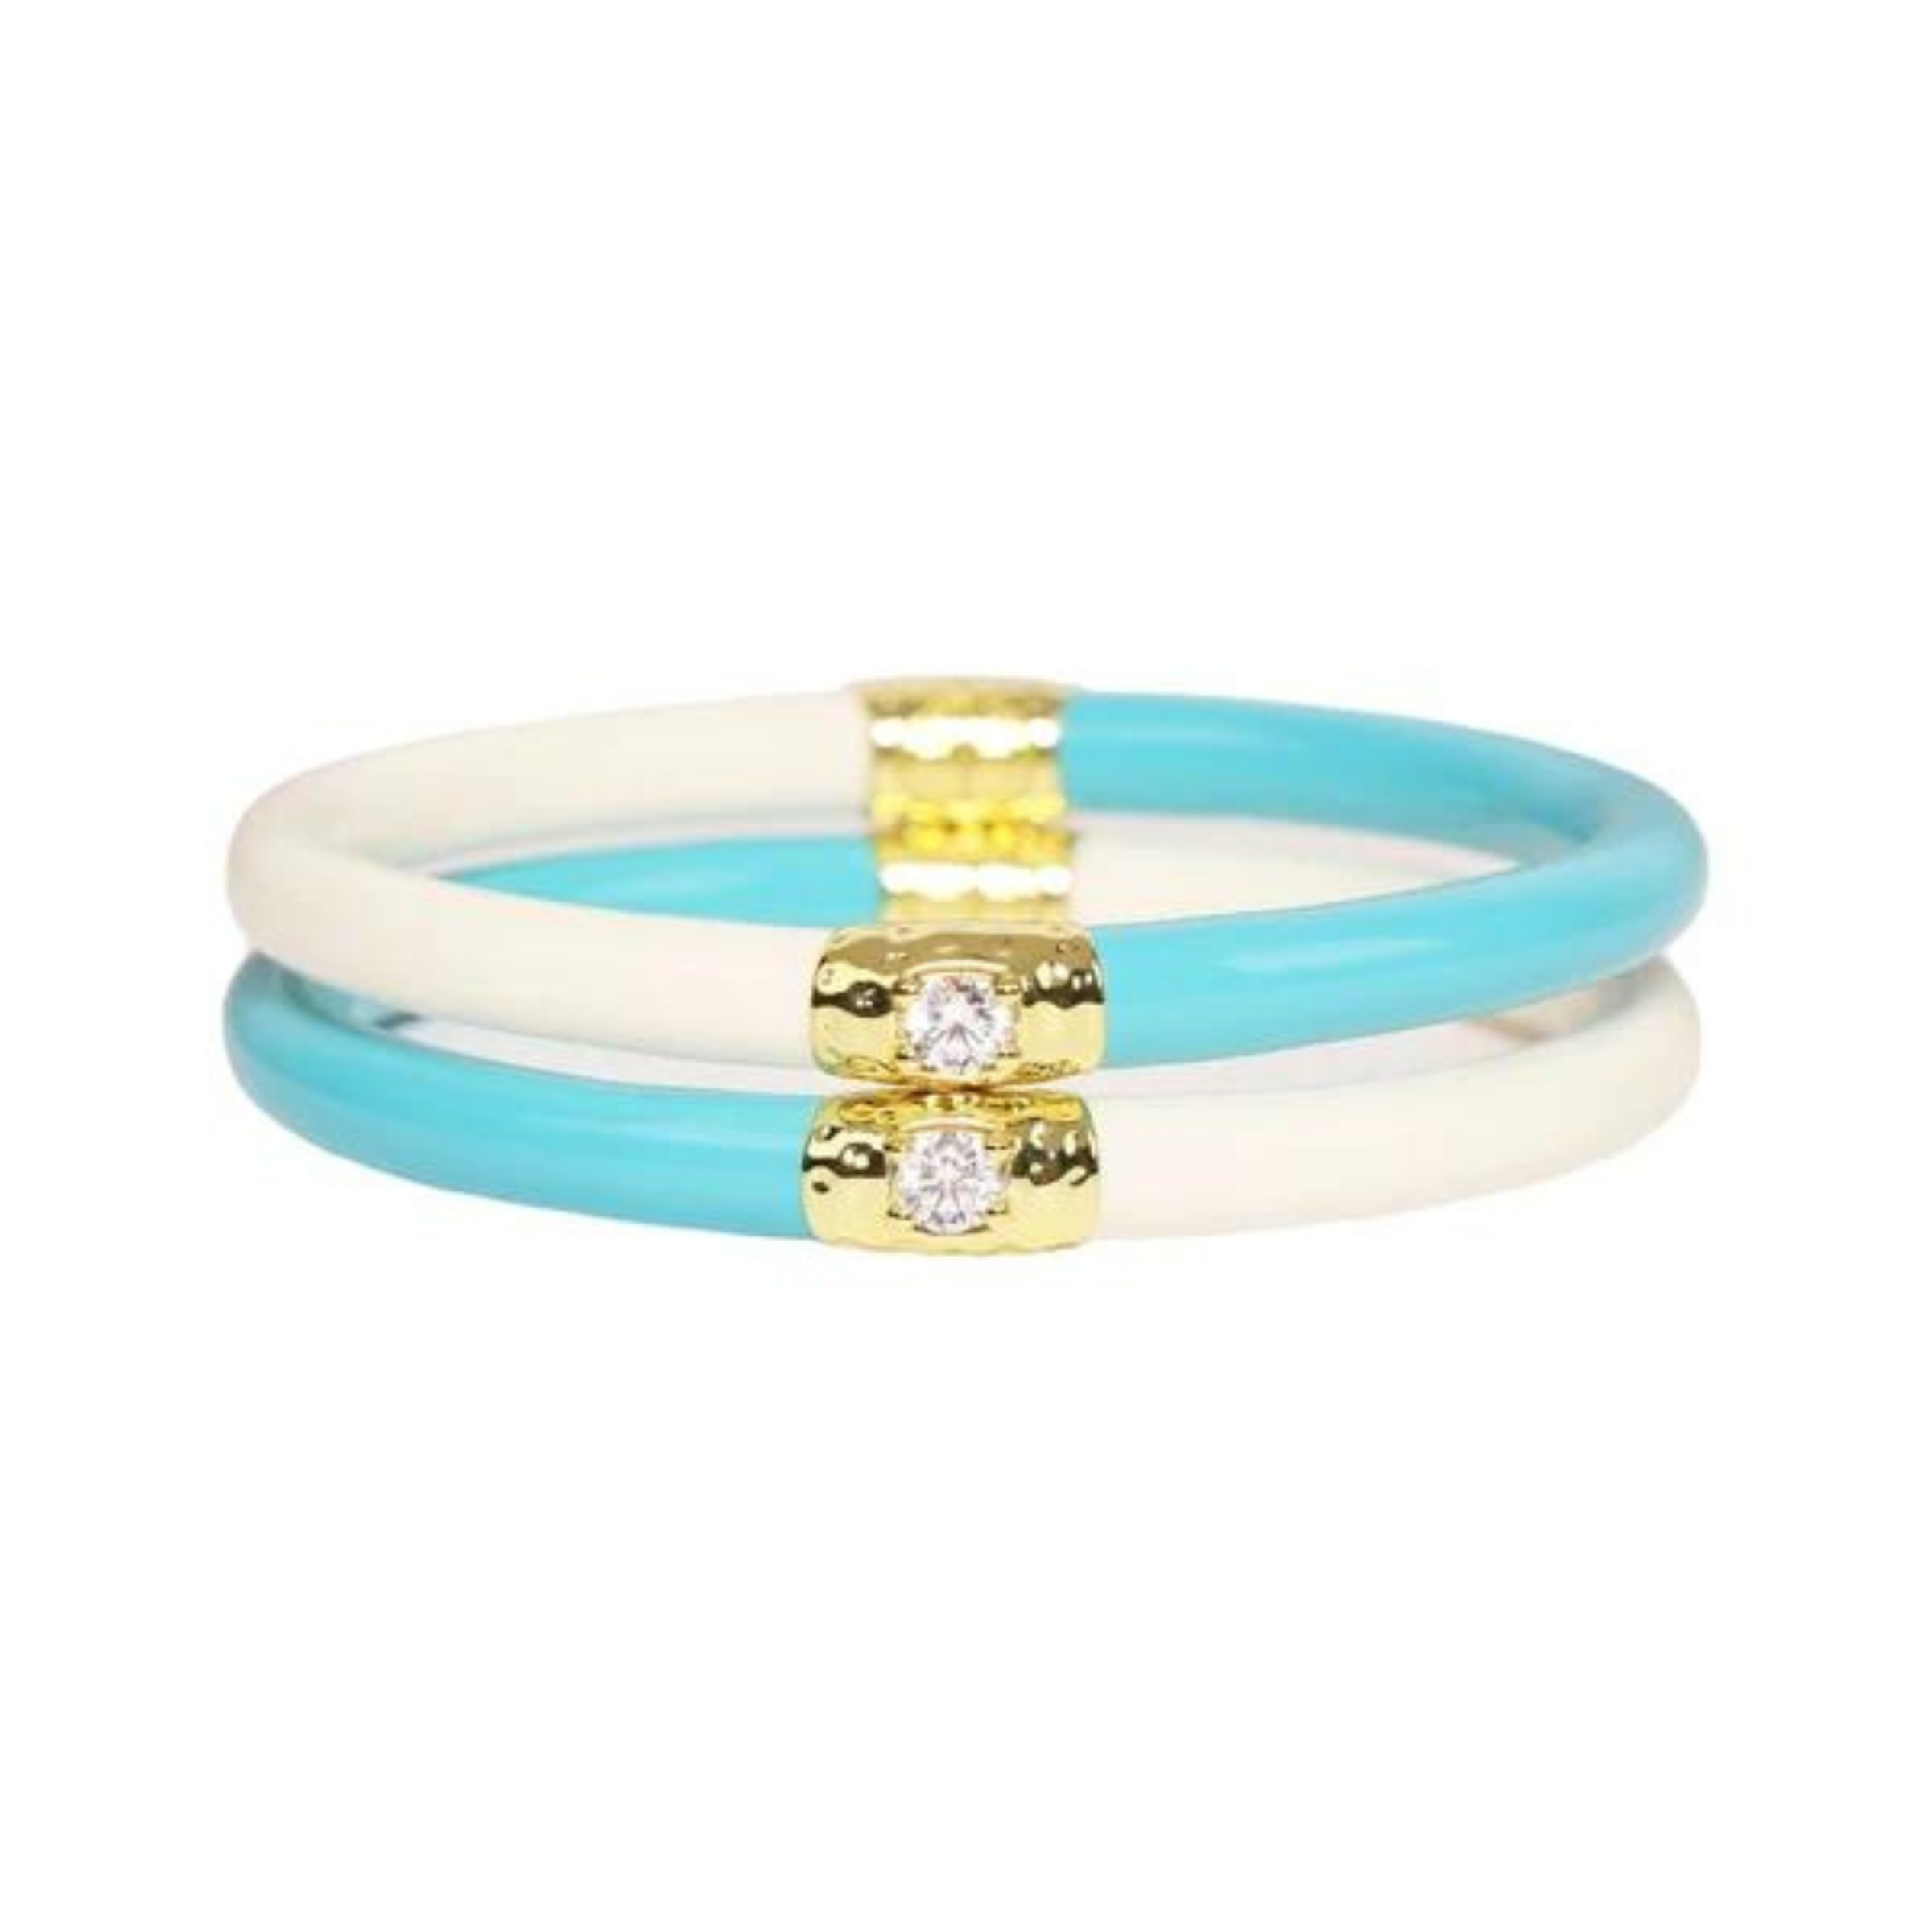 Two half white and half turquosie plastic, tube bracelet with two gold segments on the bracelet. These bracelets are pictured on top of each other on a white background. 